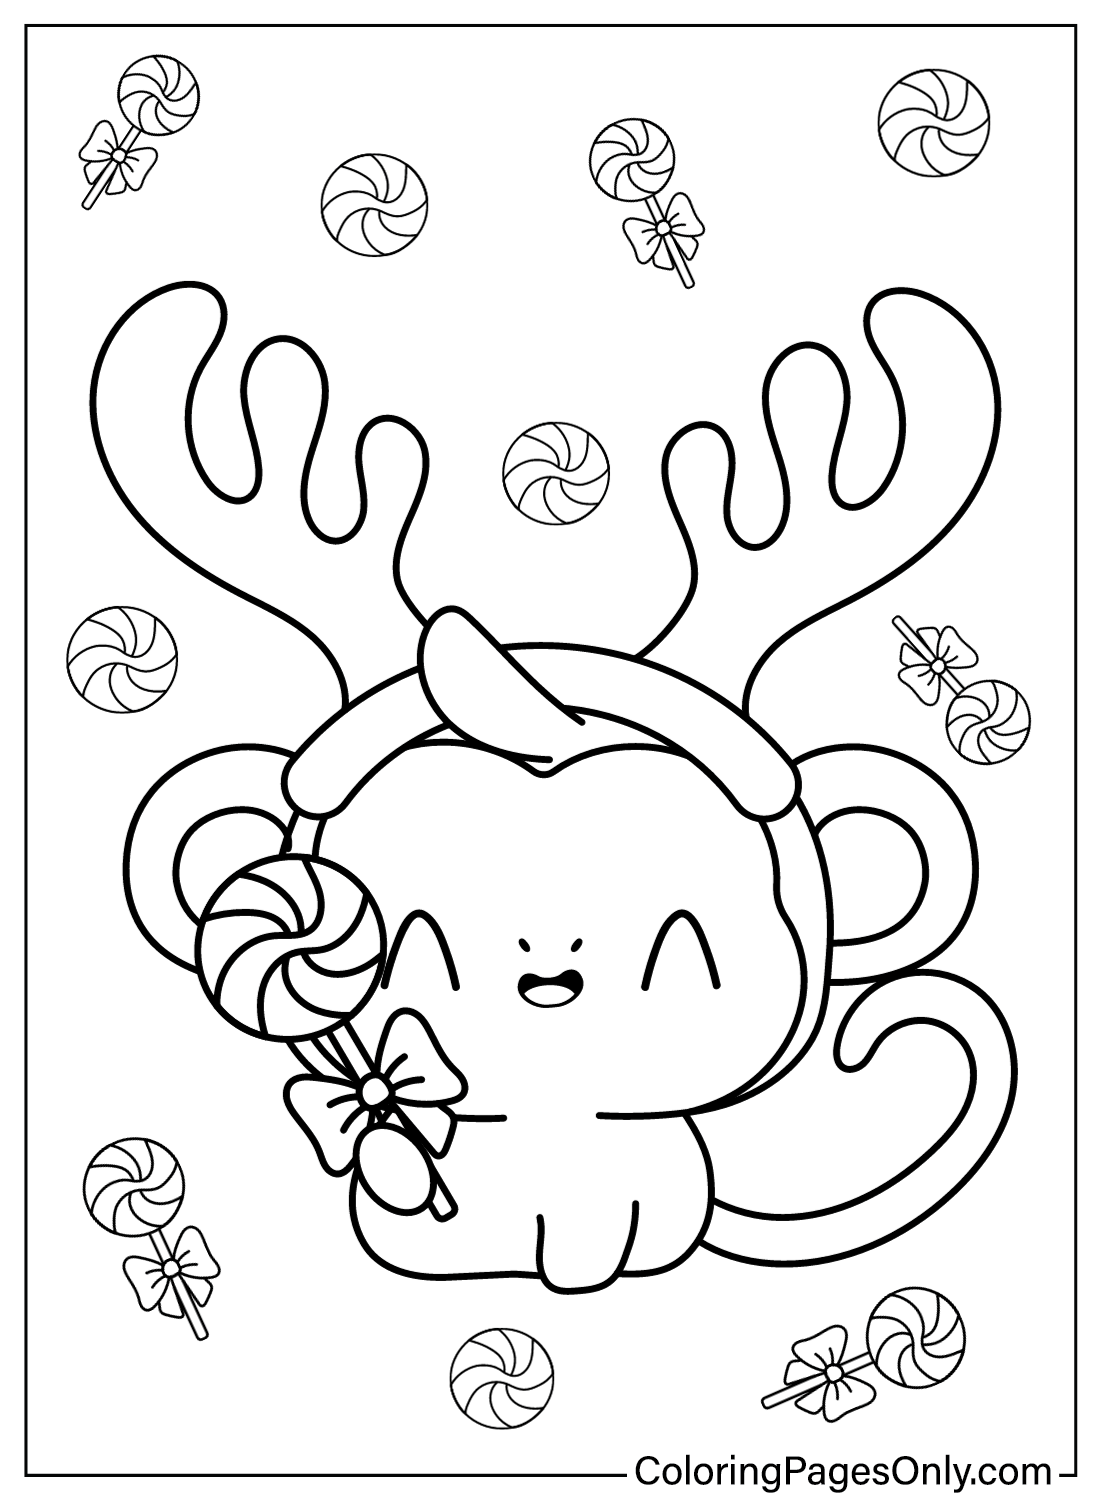 Xmas Monkey Coloring Pages